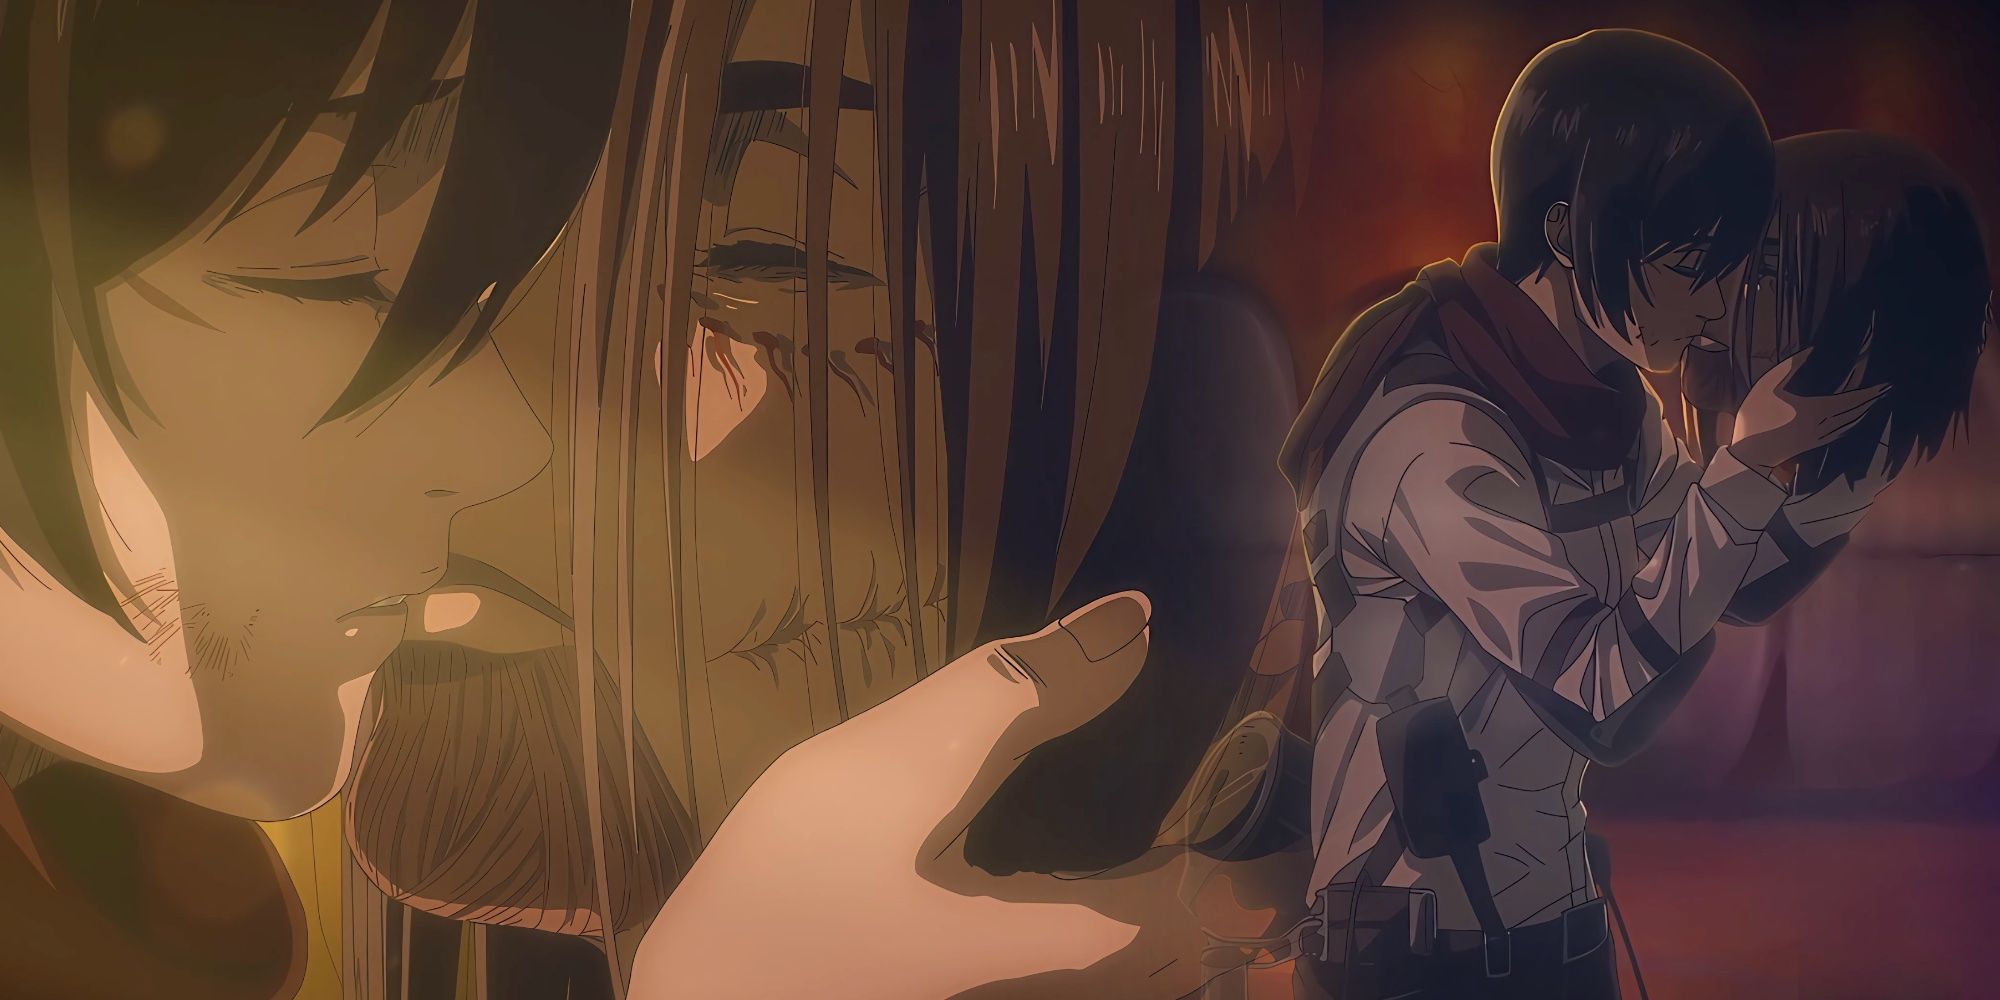 Mikasa holding and kissing Eren's severed head